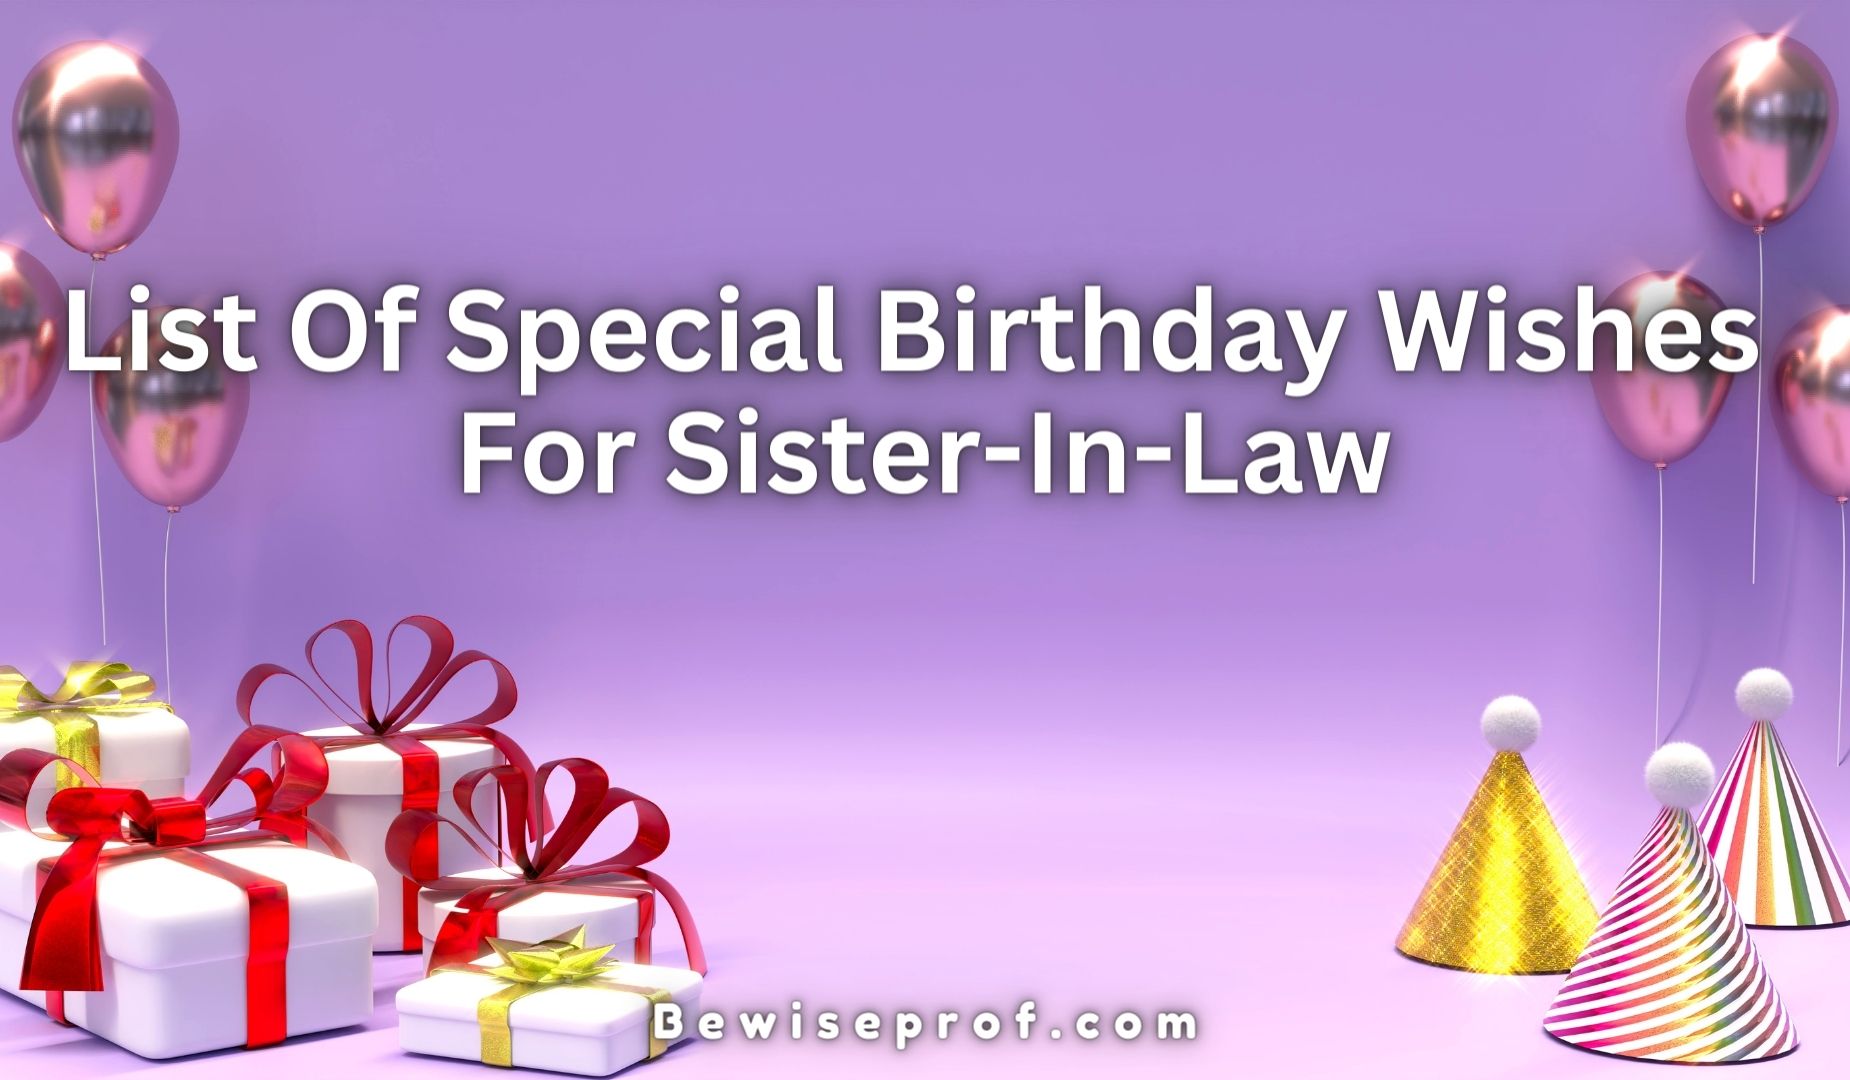 List Of Special Birthday Wishes For Sister-In-Law